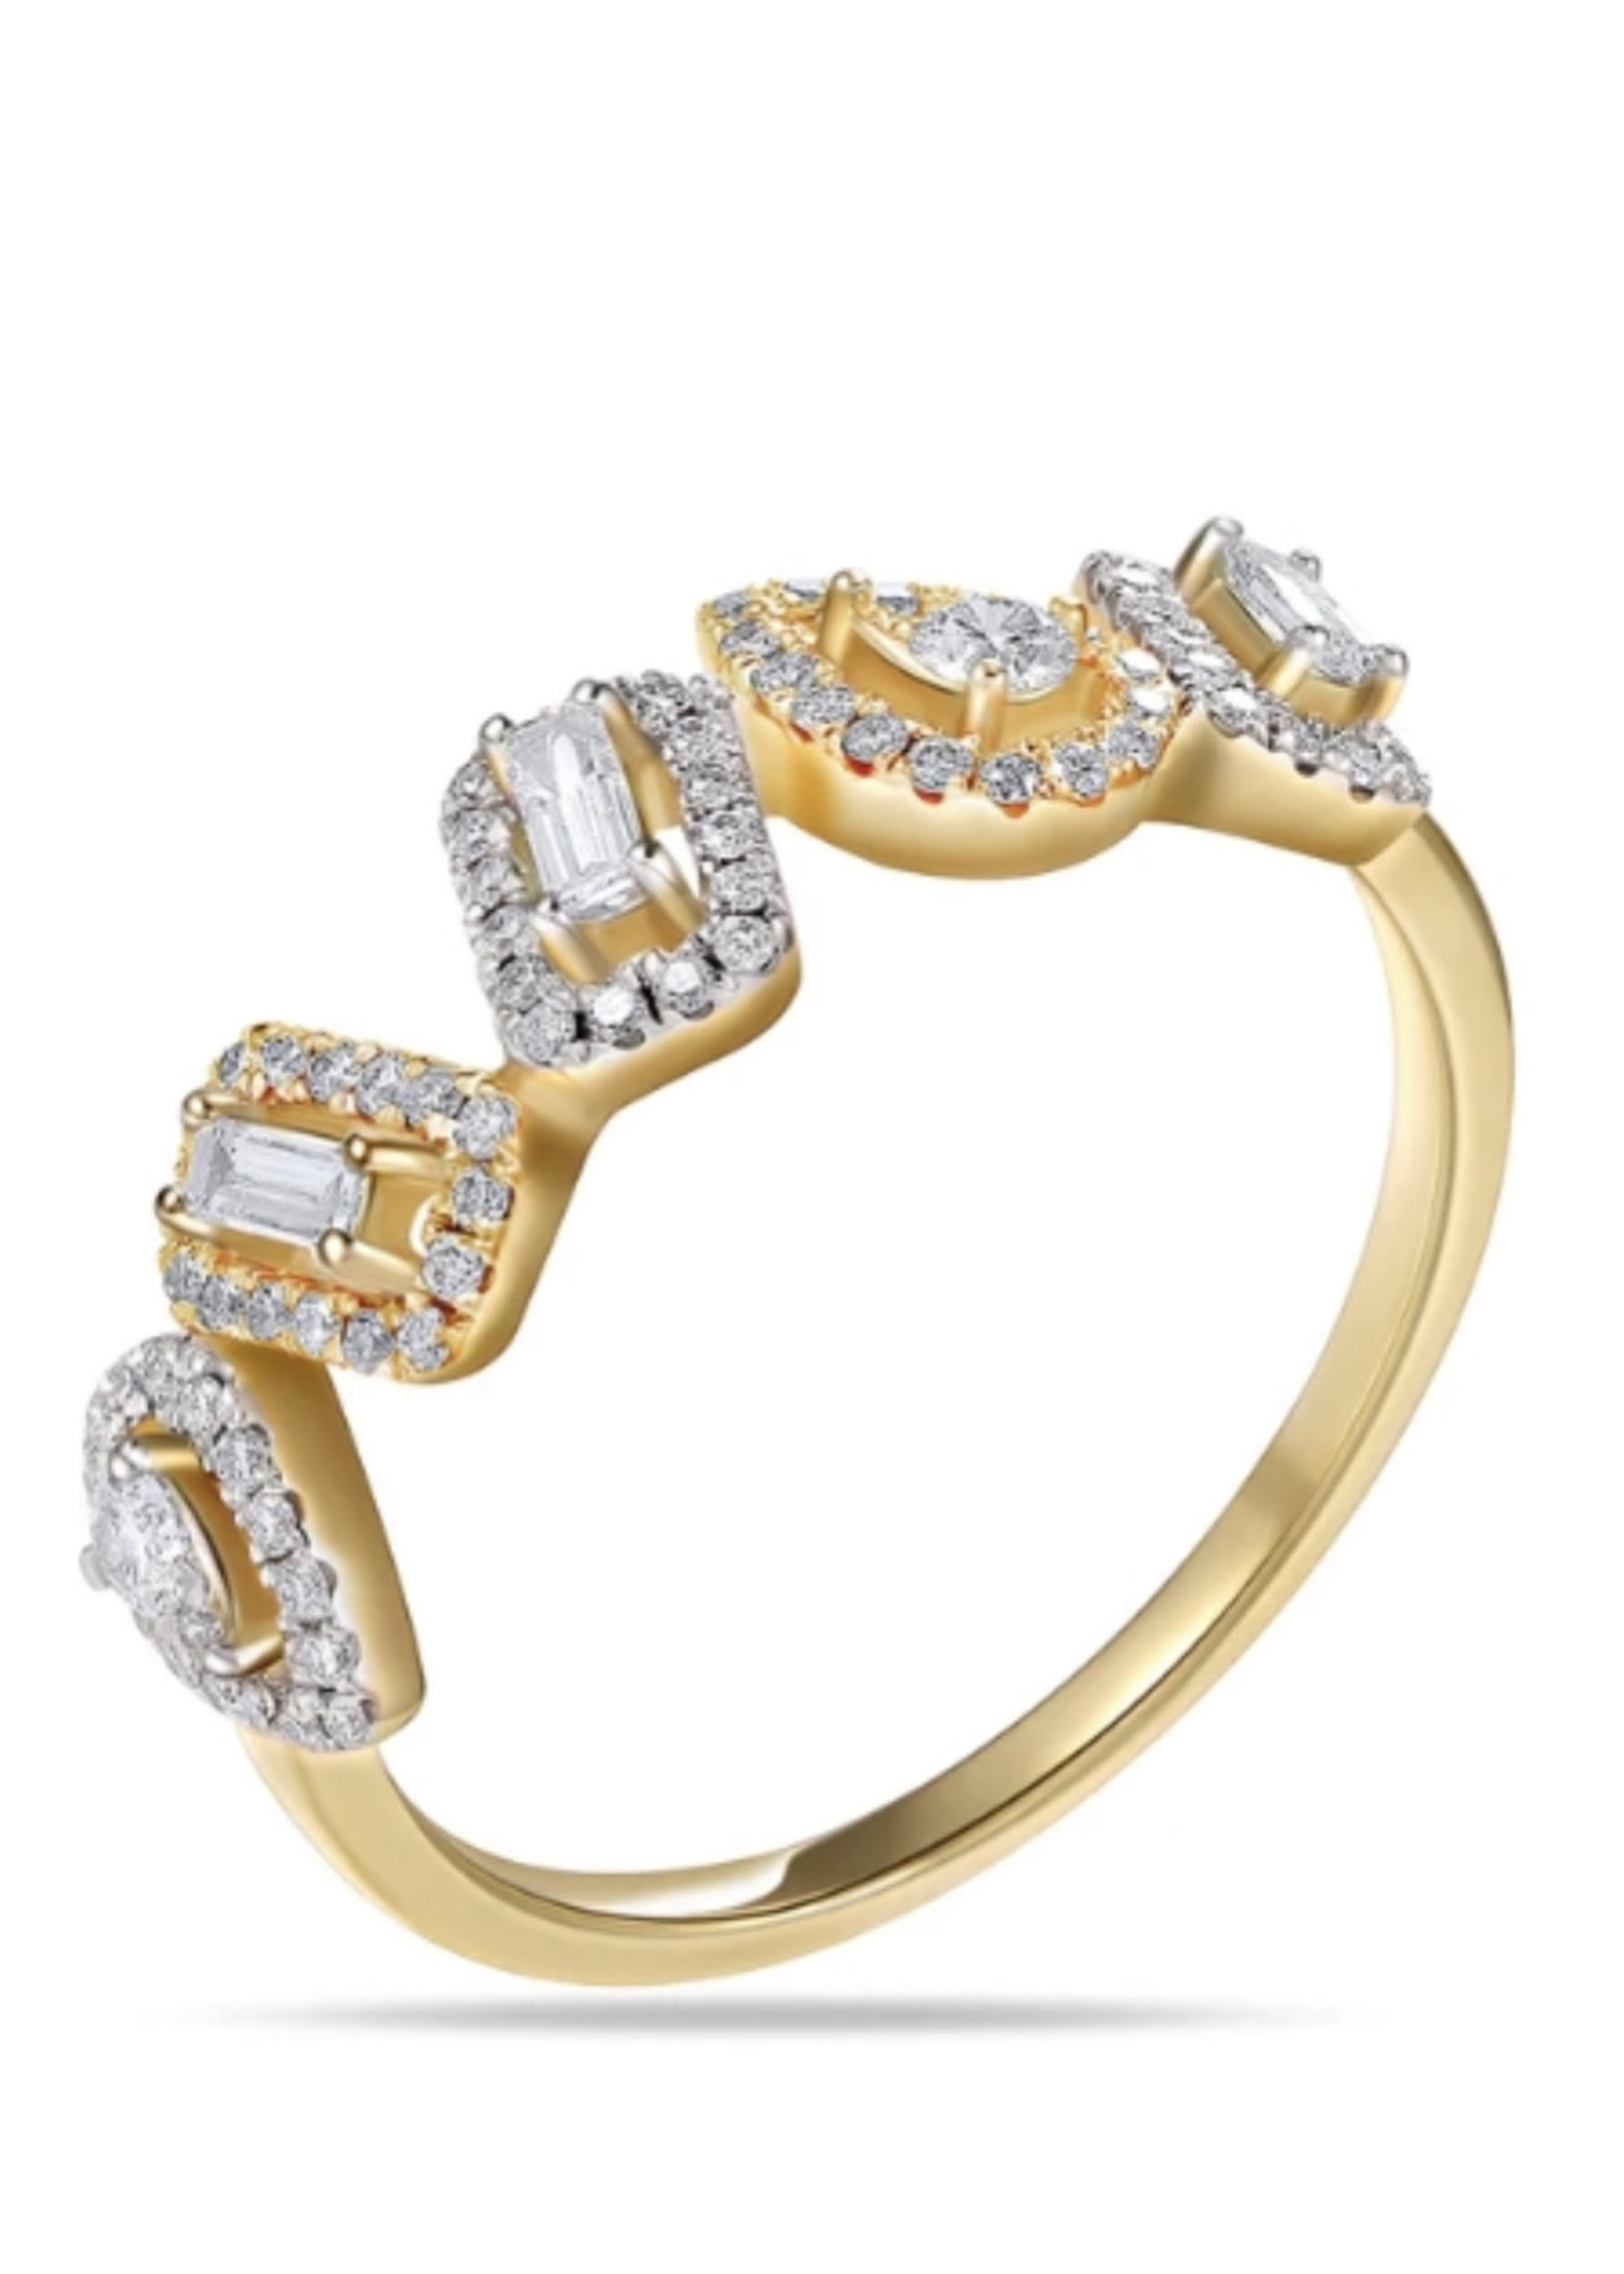 Shula NY 14kY/W .50ctw baguette and round diamond ring. One of our Best Sellers!